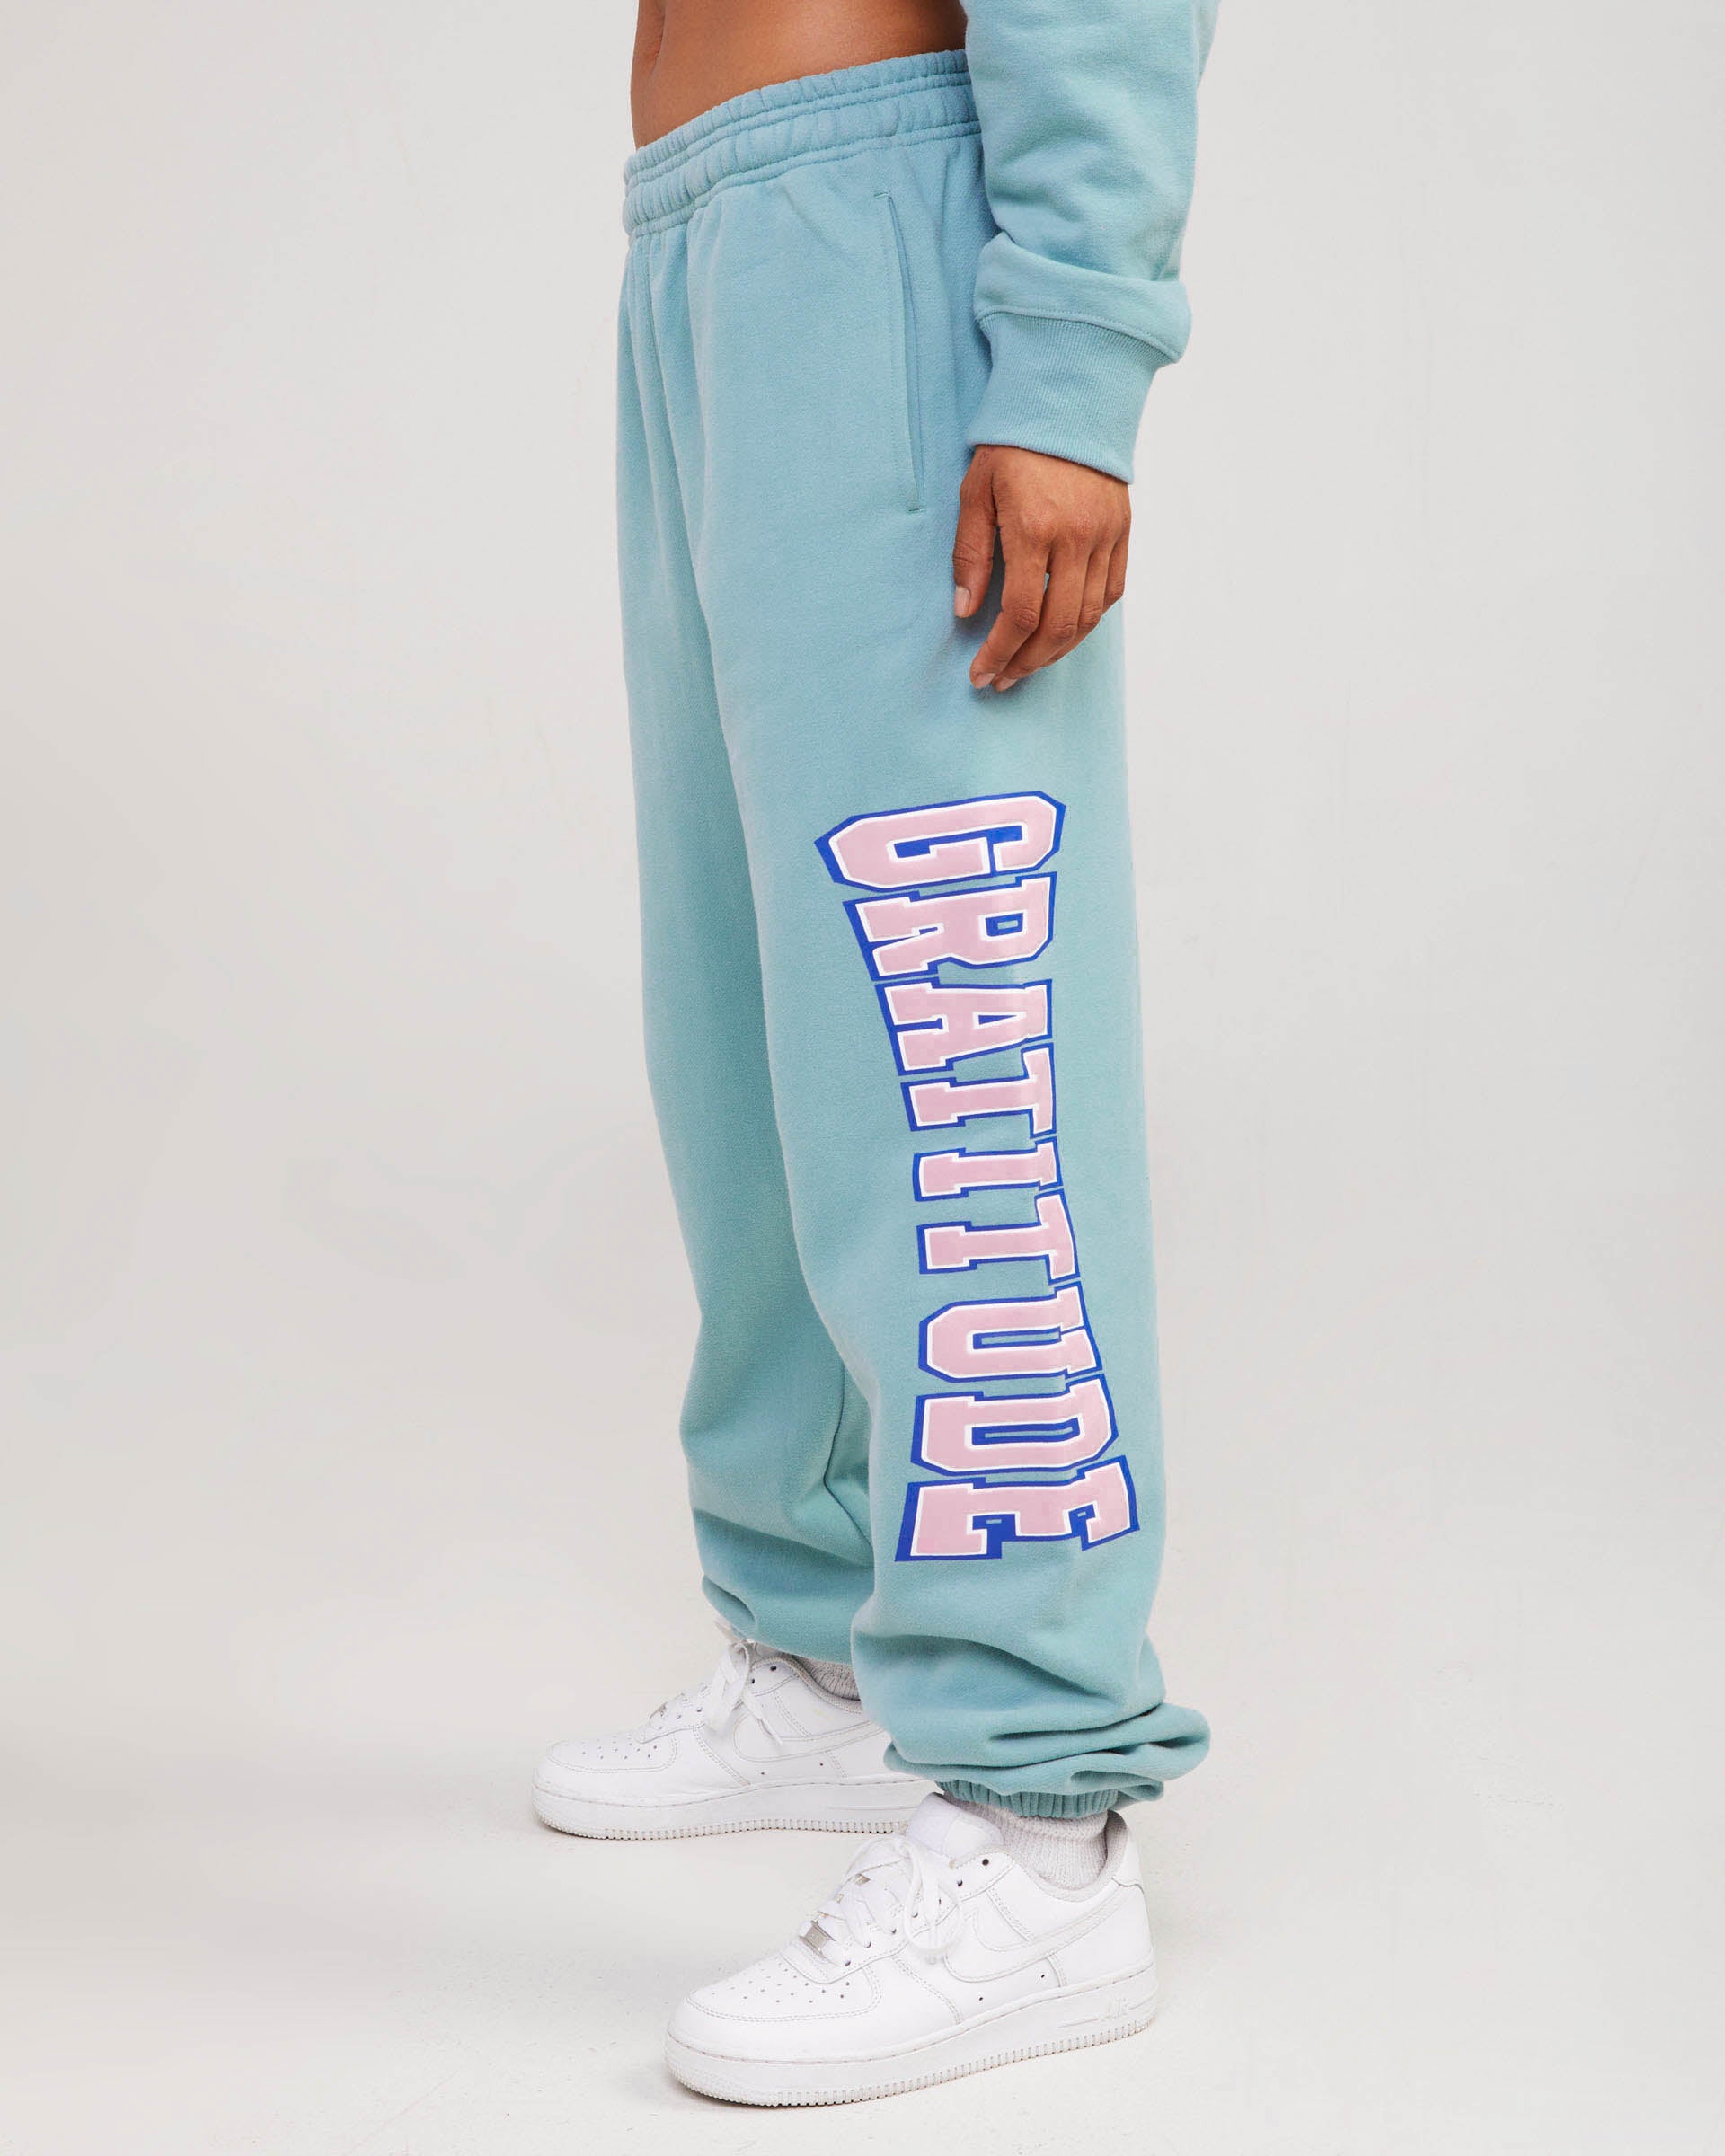 teal sweatpants with gratitude graphic